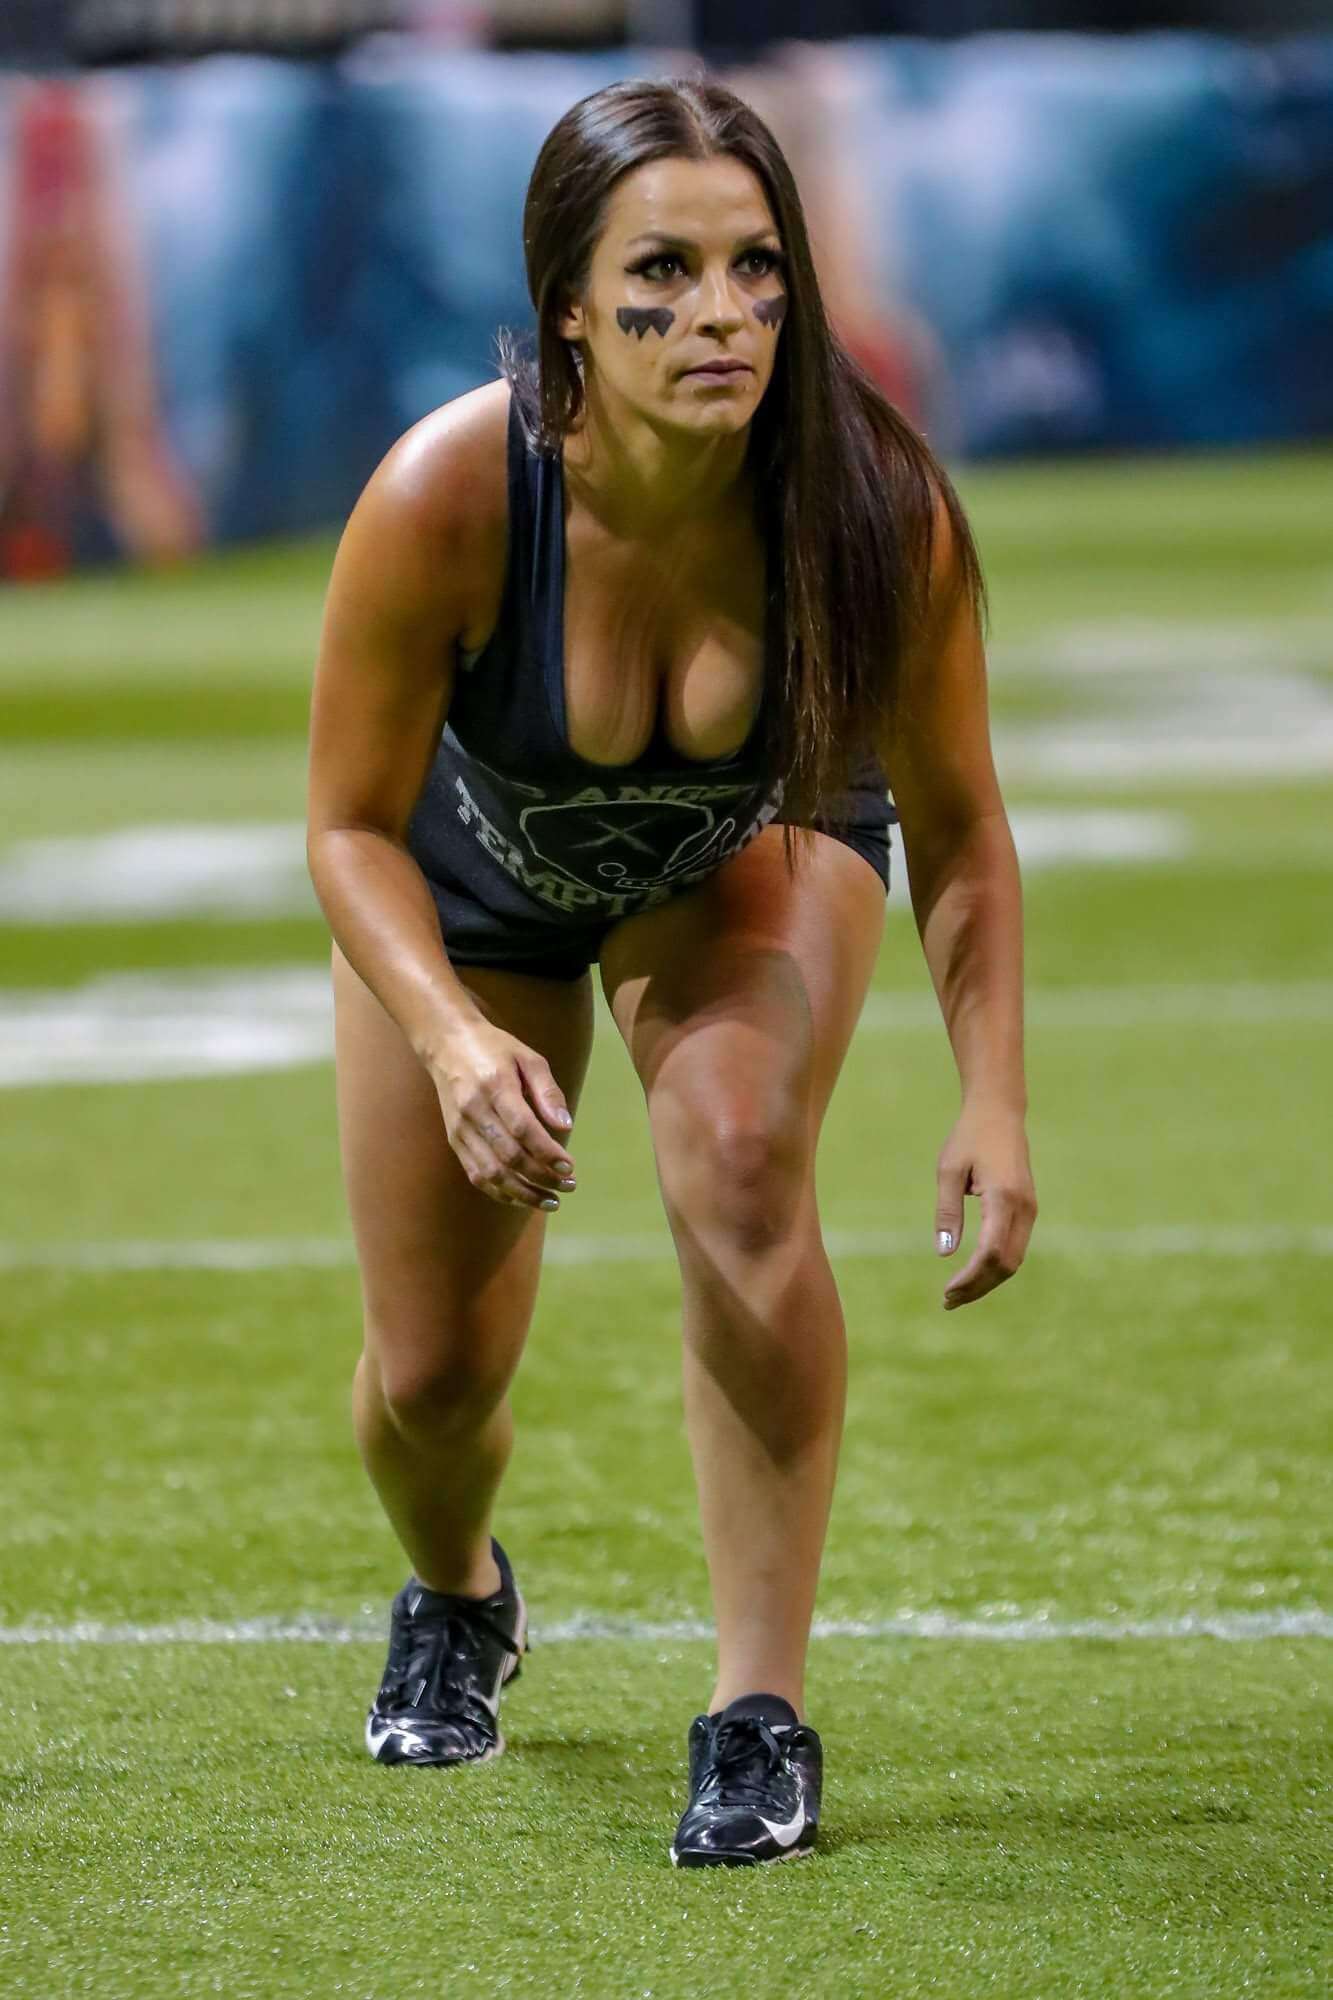 The Legends Football League Beautiful Women And Football, Need We Say Anymore! 84